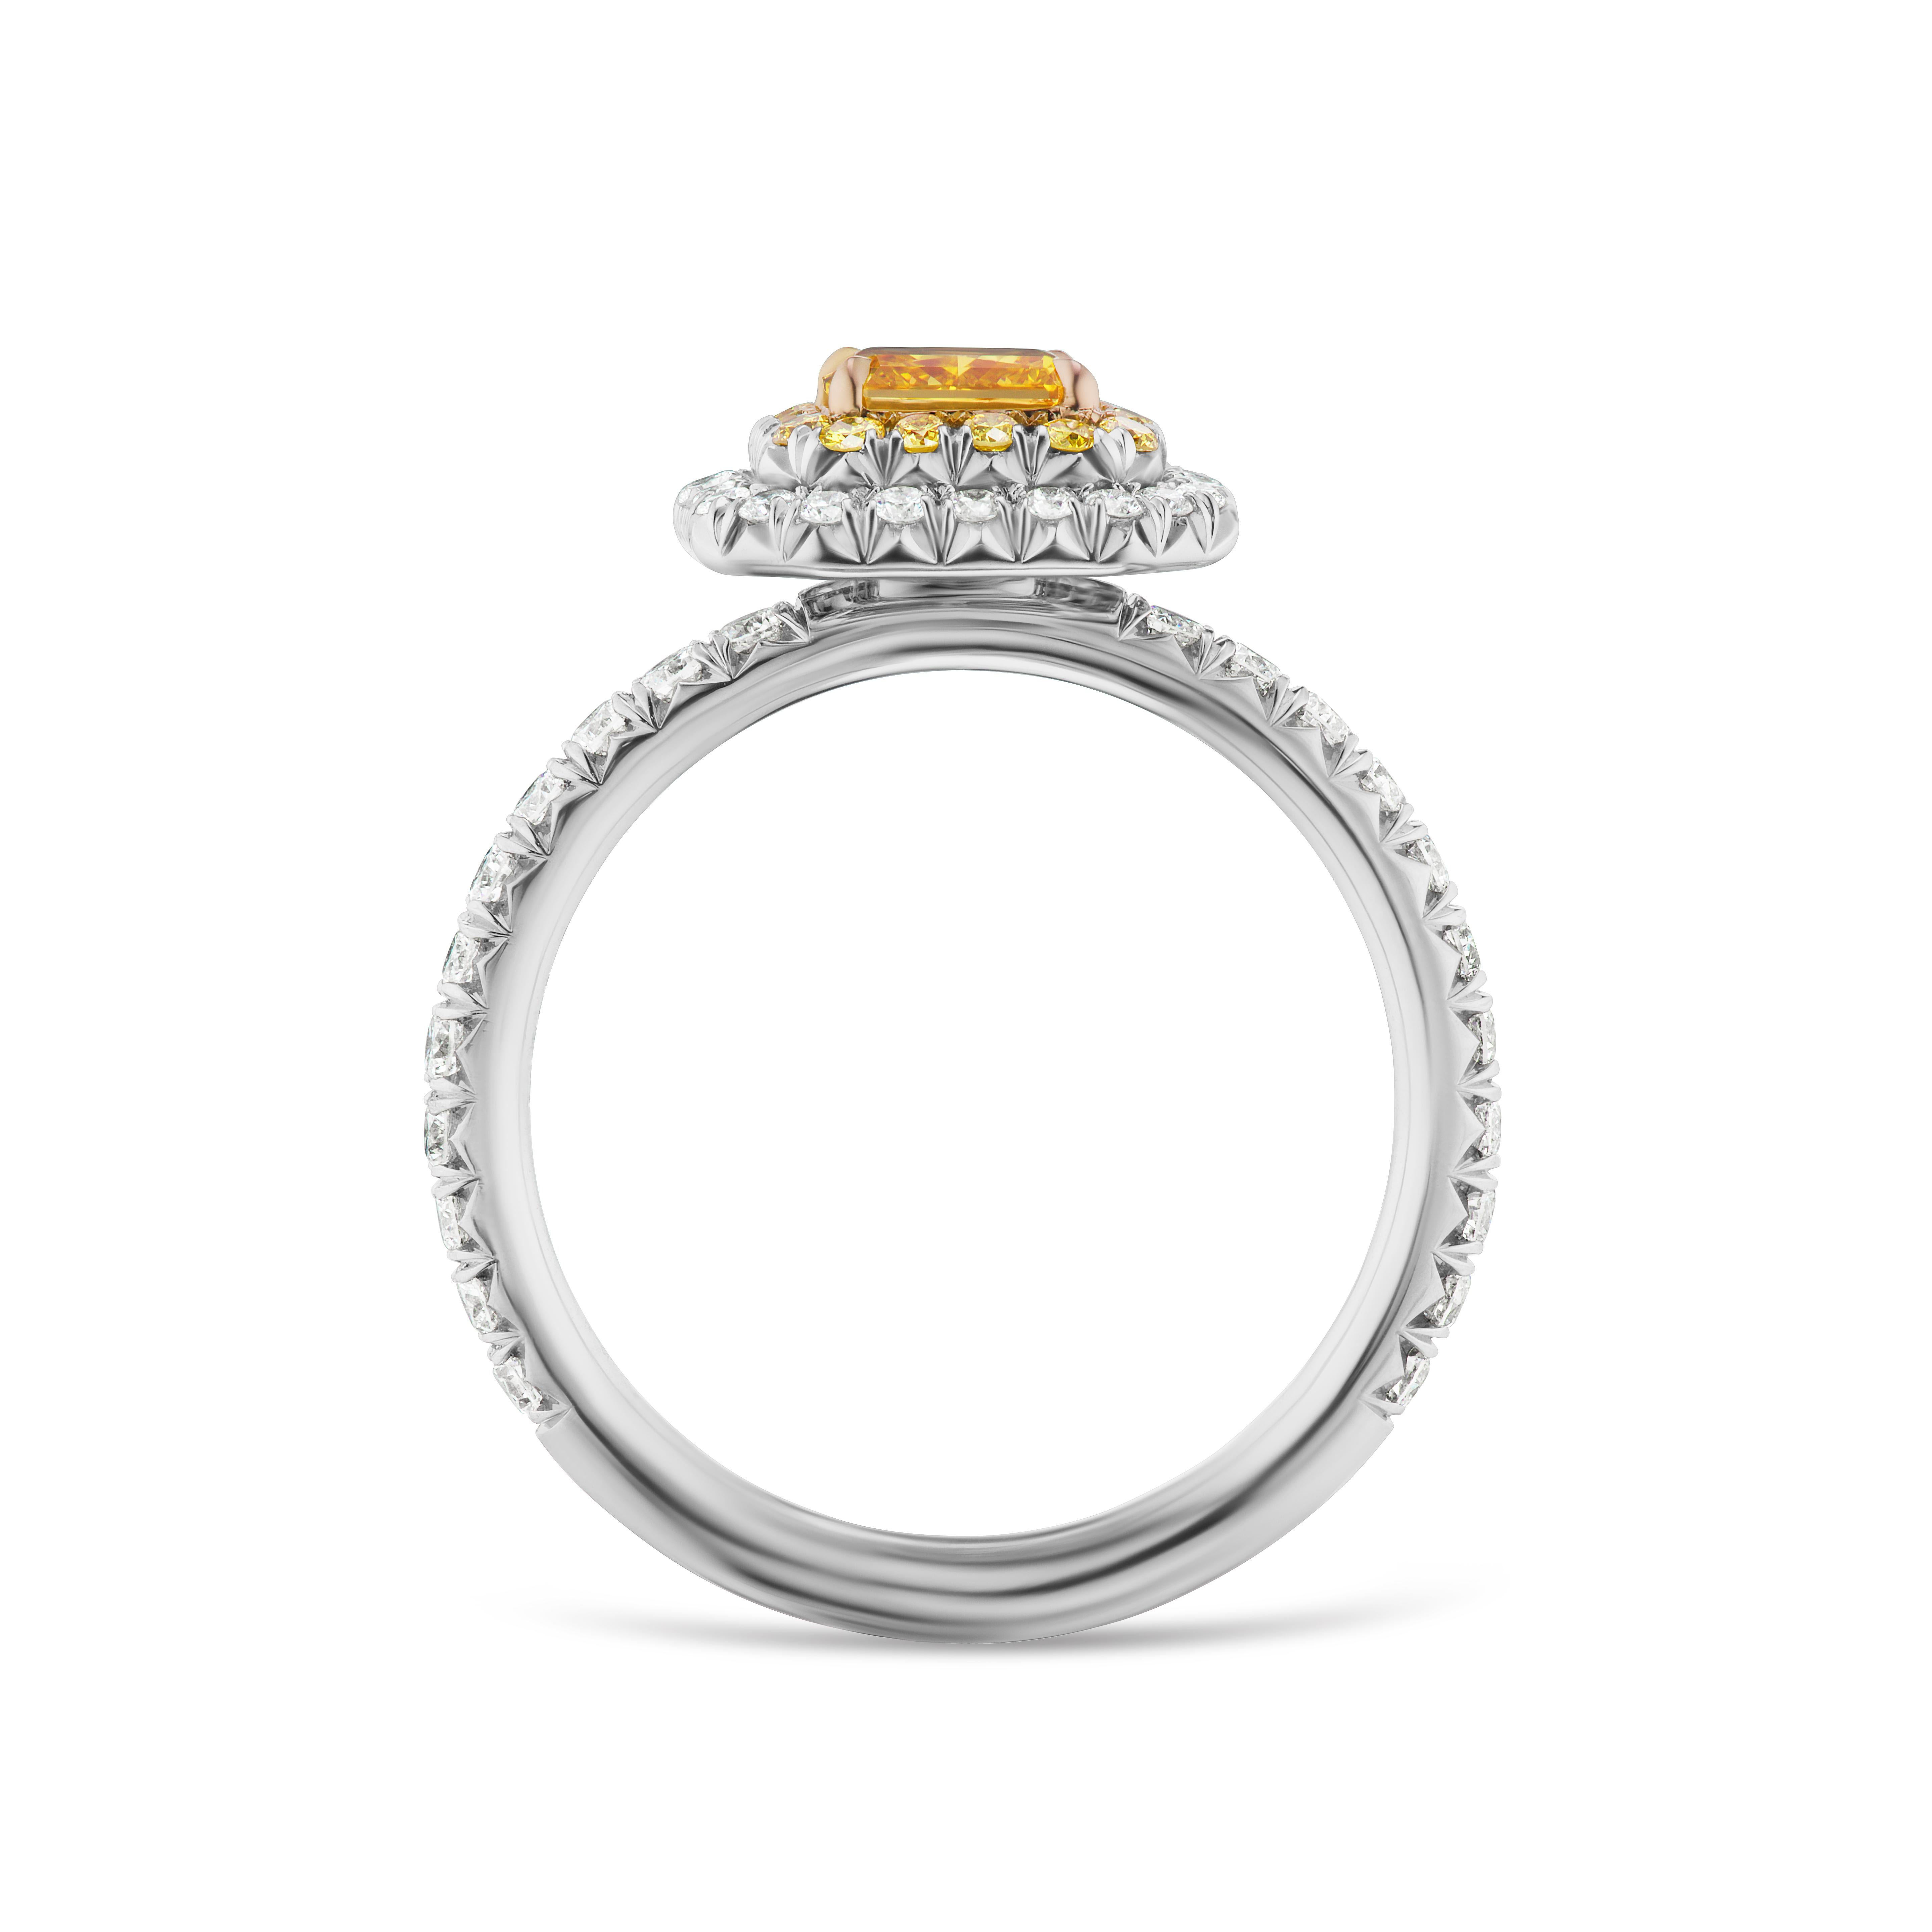 This engagement ring features a 0.74 carat fancy vivid yellow orange diamond with 18 fancy orange diamonds weighing 0.13 carats and 46 white side diamonds weighing 0.54 carats set in platinum.  GIA Certificate No. 1152495735. Size 6. 

Resizeable